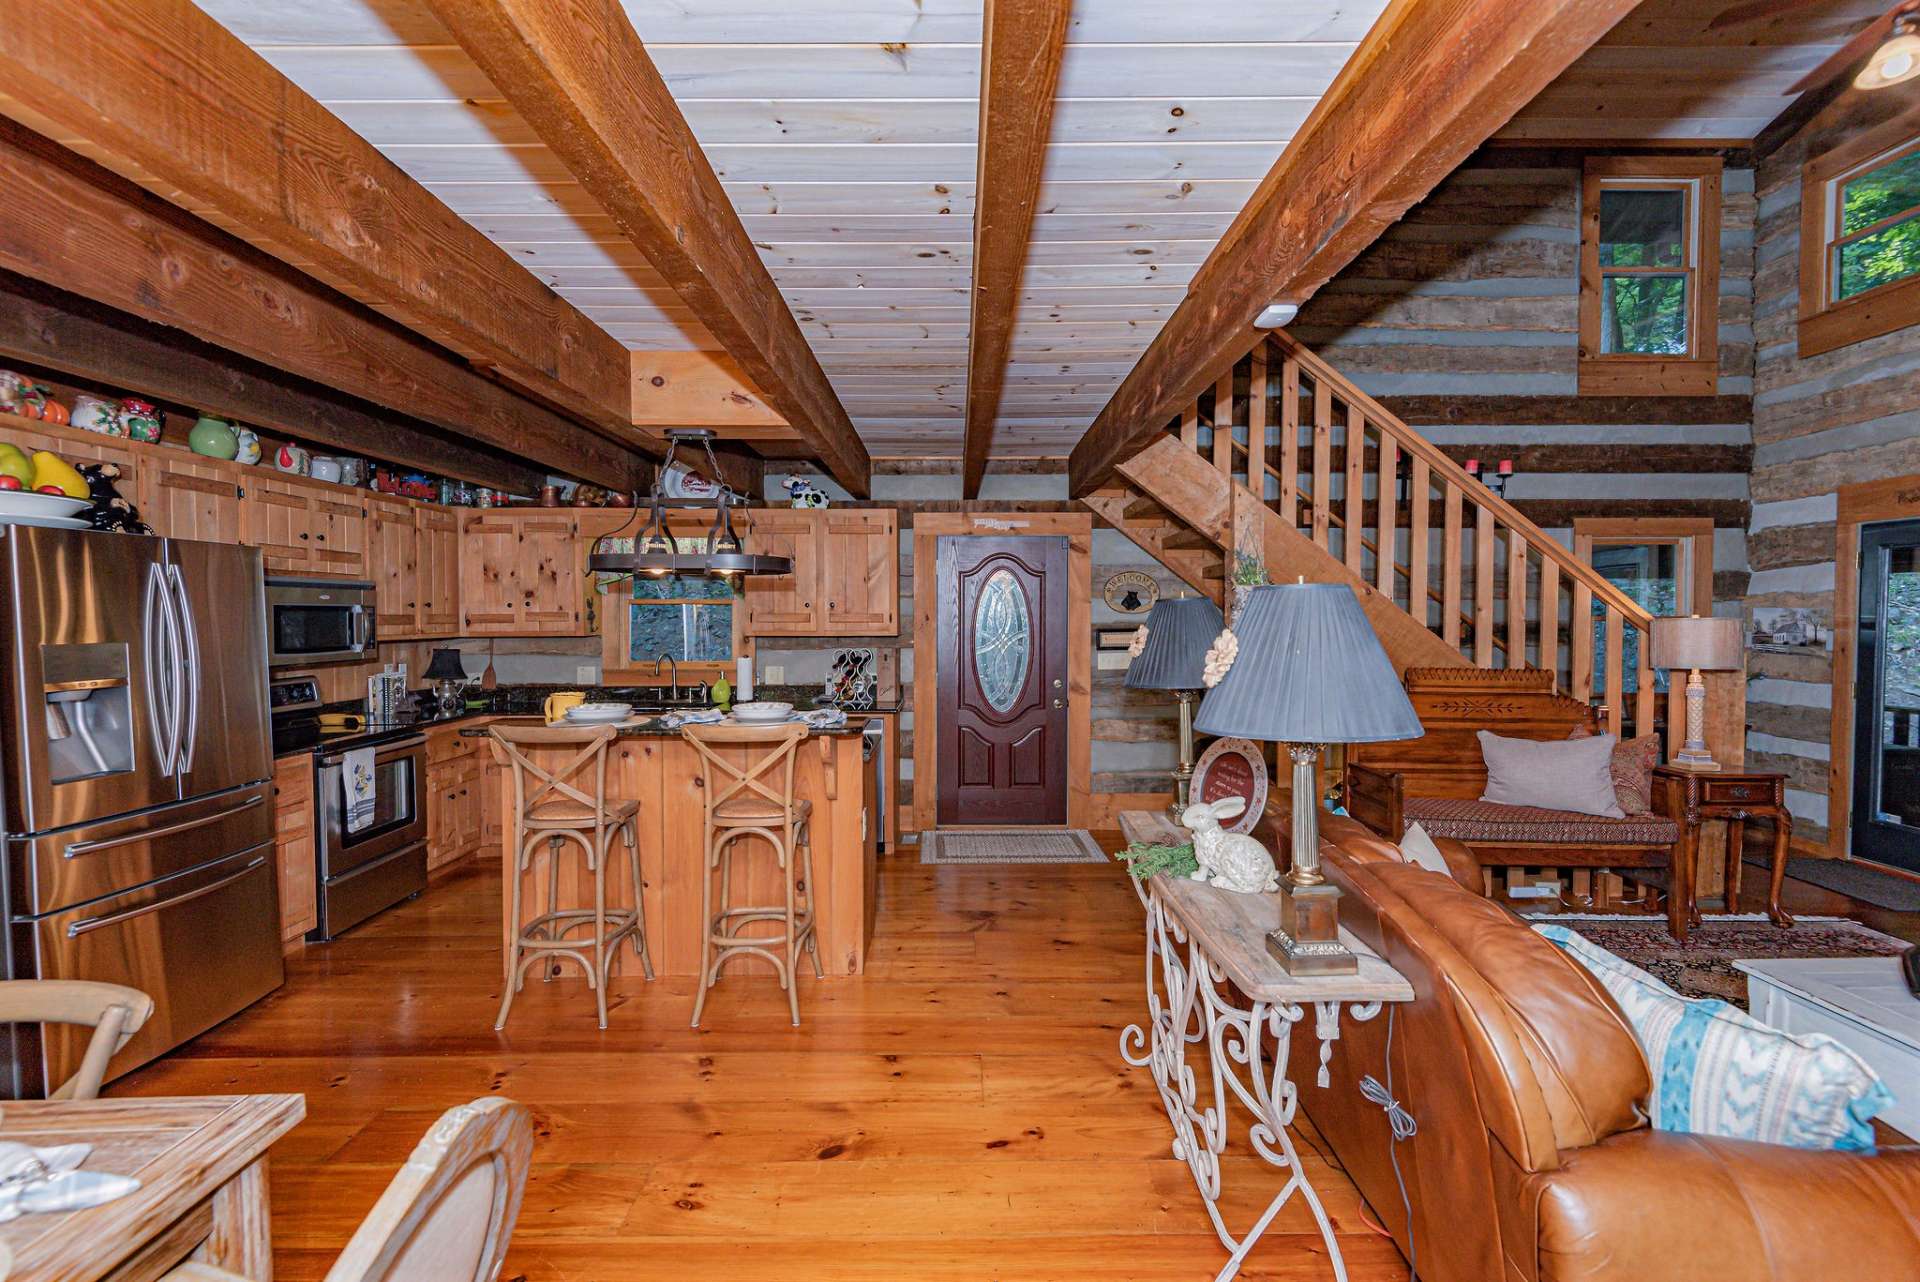 You are greeted with an open floor plan offering an invitation to explore the cabin.